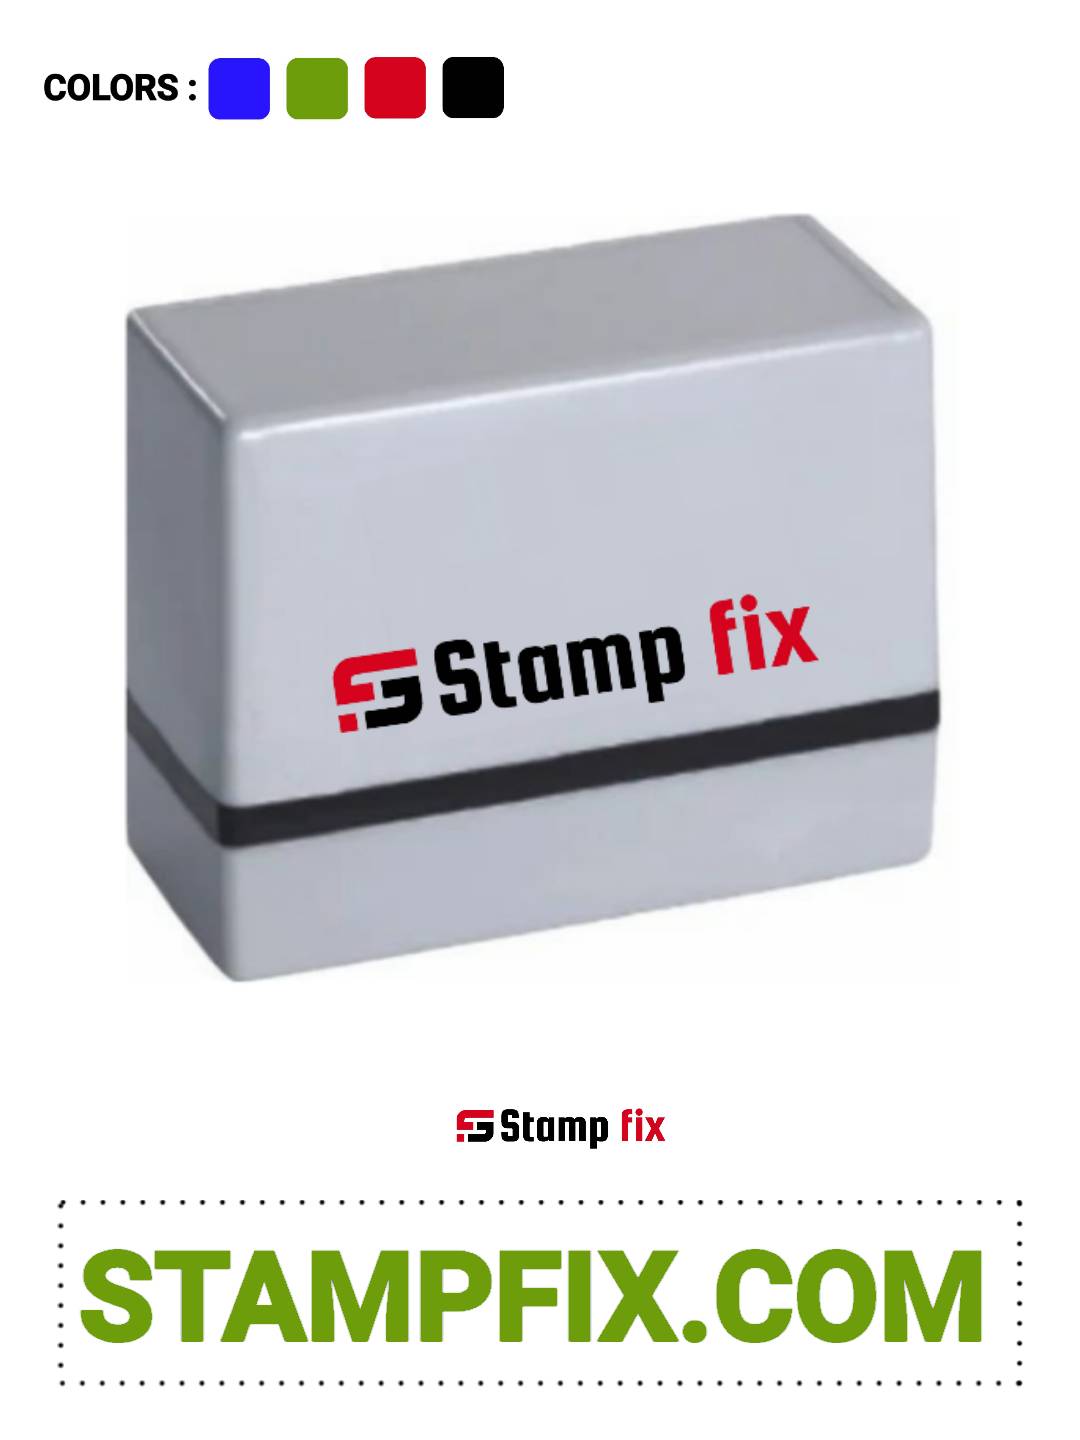 Pre Ink name stamp, personal stamp, executive stamp, owner stamp, director stamp, patner stamp , firm stamp, easy stamp, shop stamp, business marking stamp, Stamp by StampFix, a self-inking stamp with high-quality impressions
in India, nylon stamp, rubber stamp, pre ink stamp, polymer stamp, urgent stamp